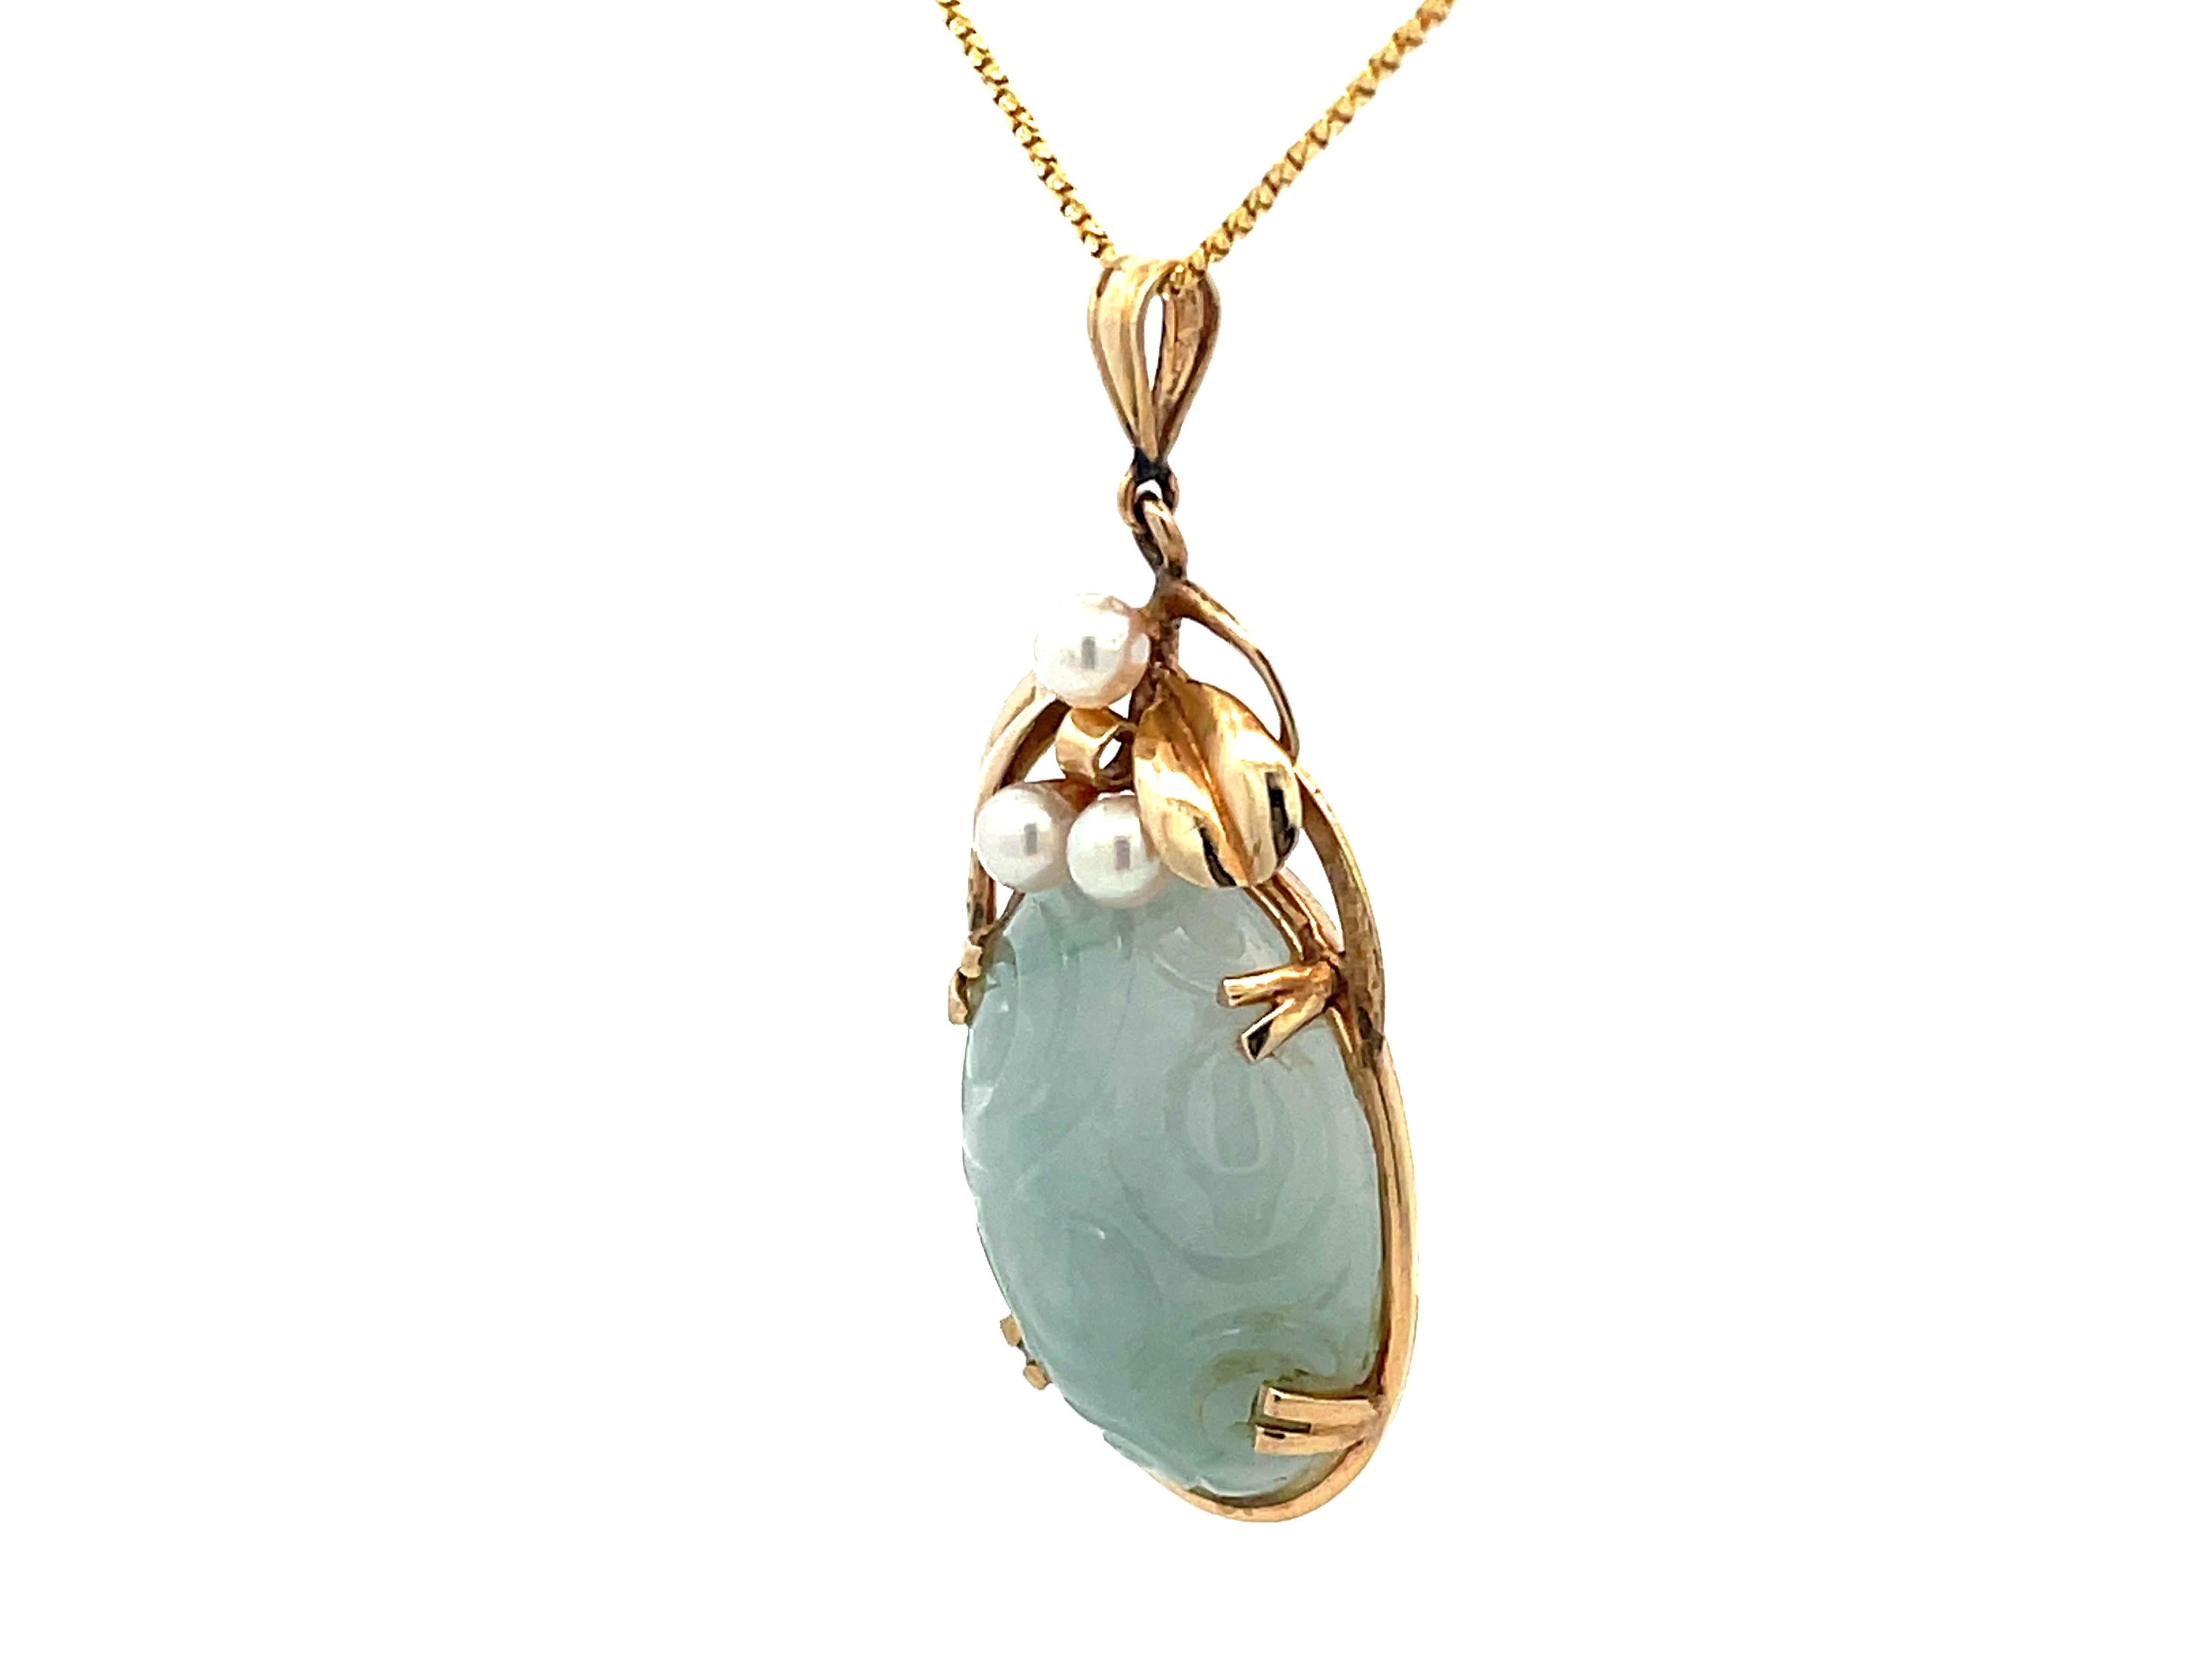 Oval Cut Mings Hawaii Carved Nephrite Jade & Pearl Pendant in 14k Yellow Gold with Chain For Sale